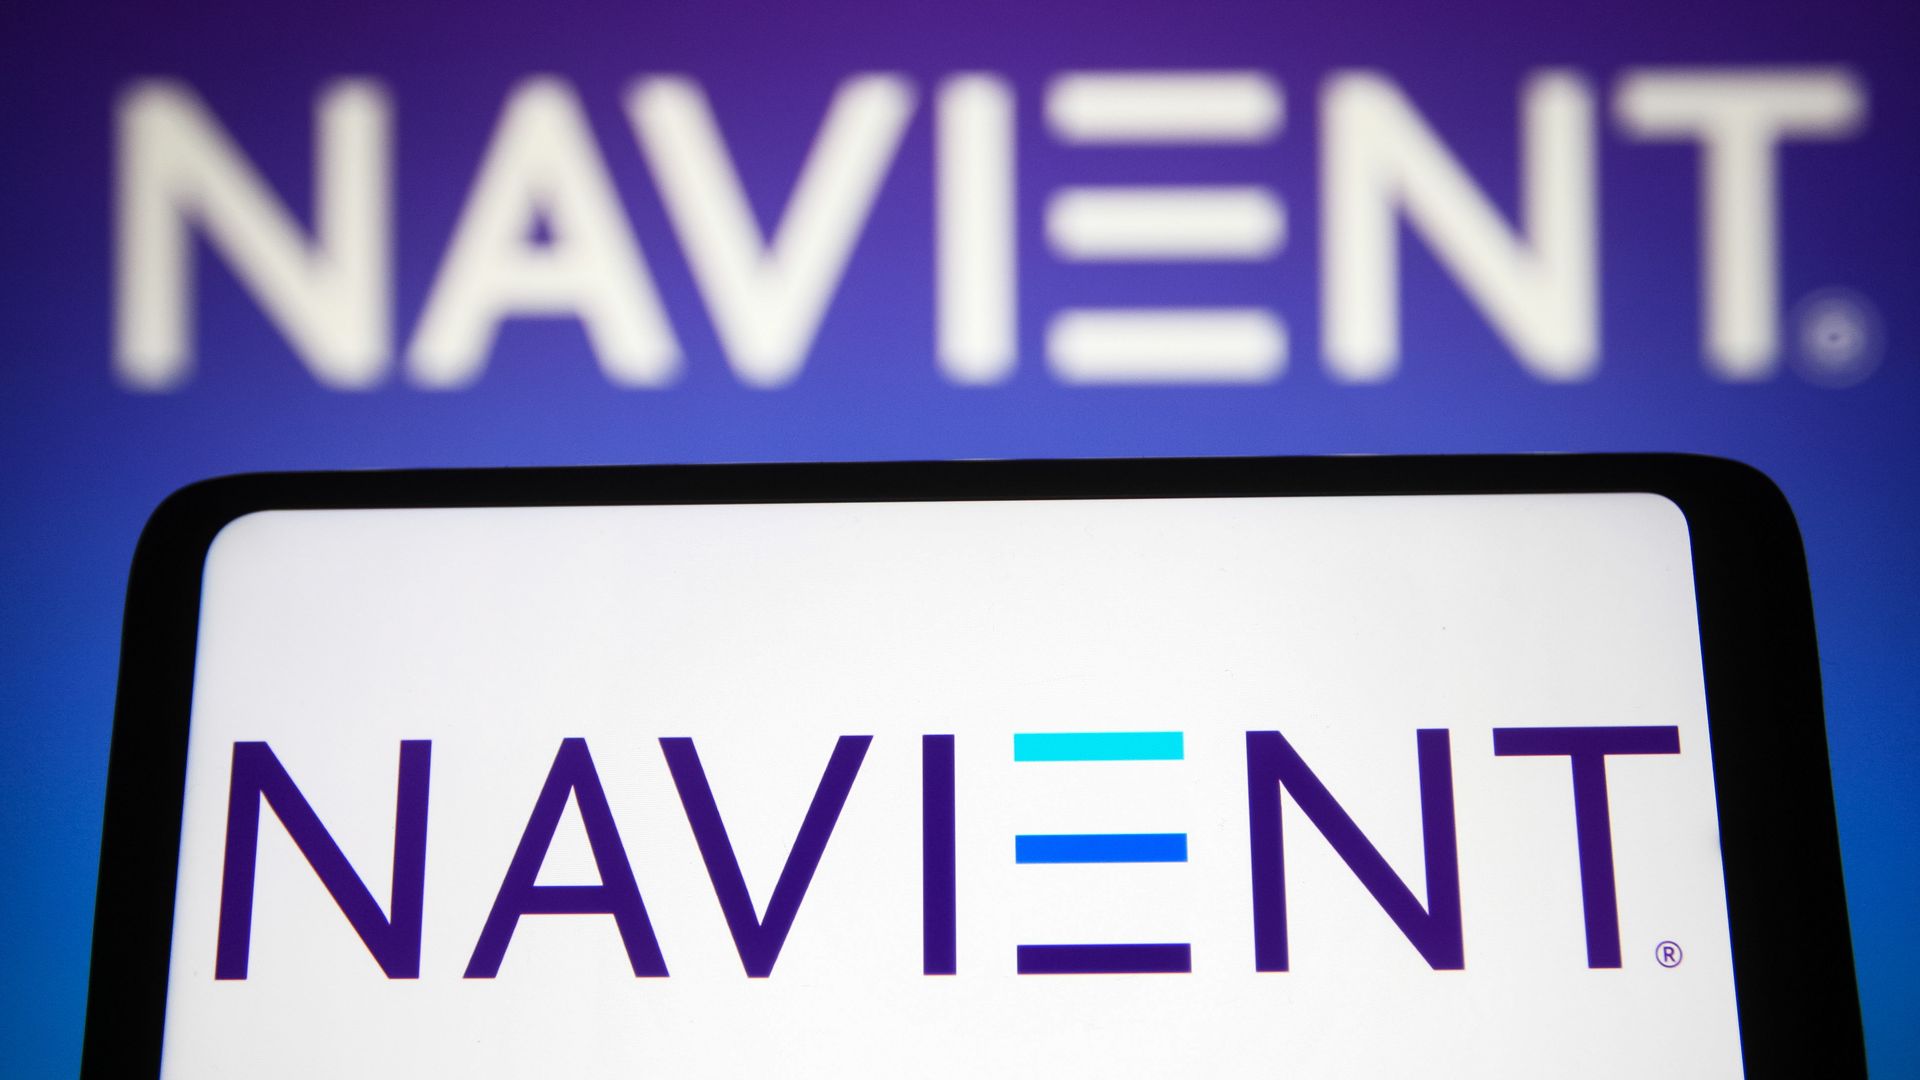 In this photo illustration, the Navient Corporation logo is seen displayed on a smartphone and in the background.